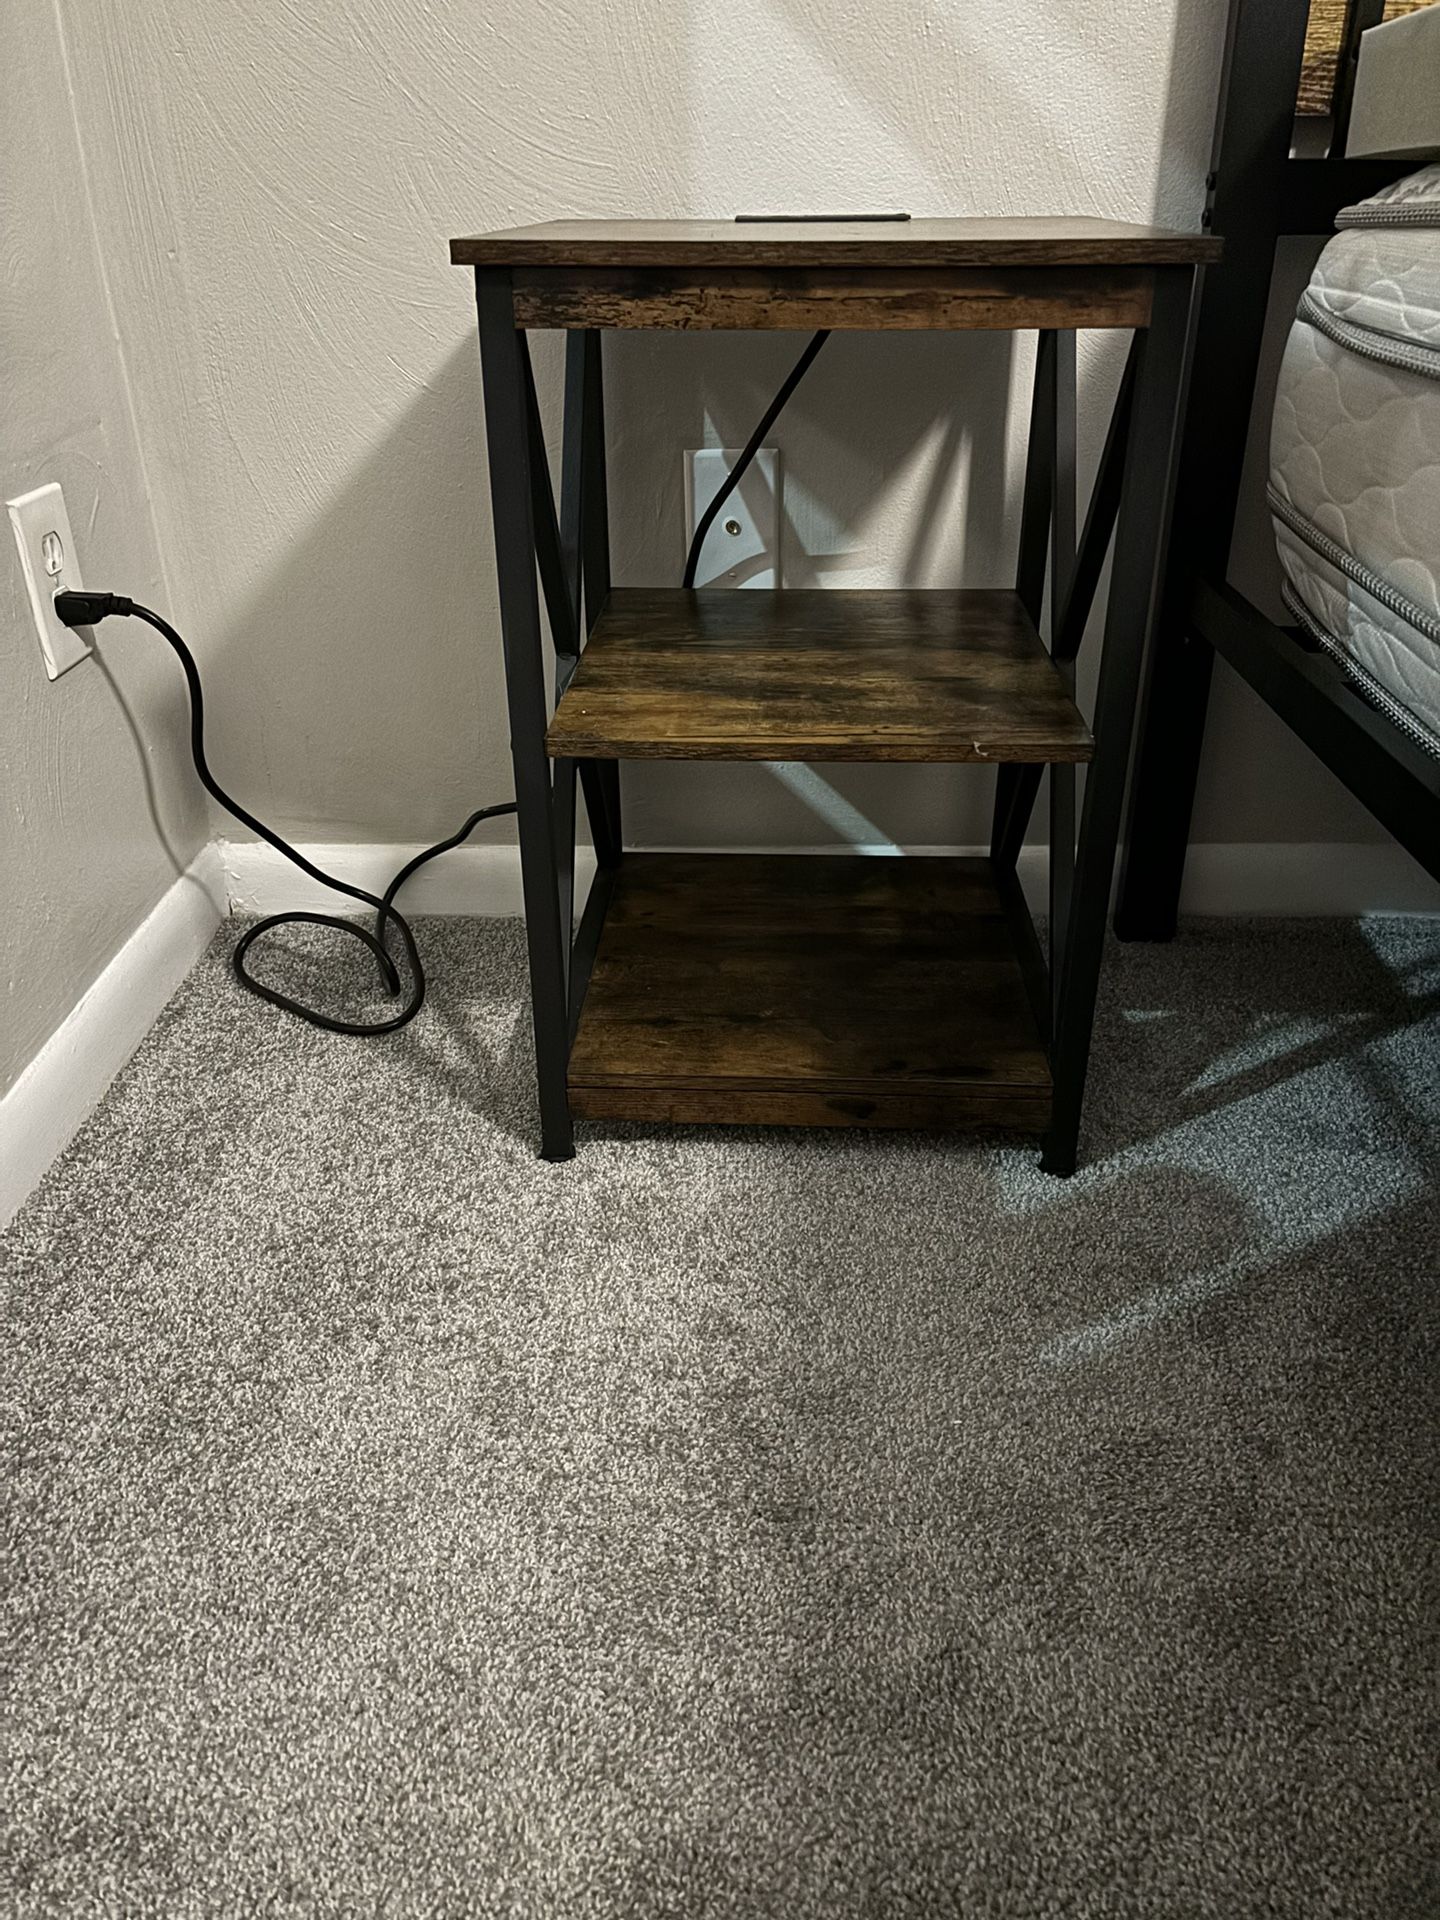 Night Stand W/ Outlets And USB Plug Ins